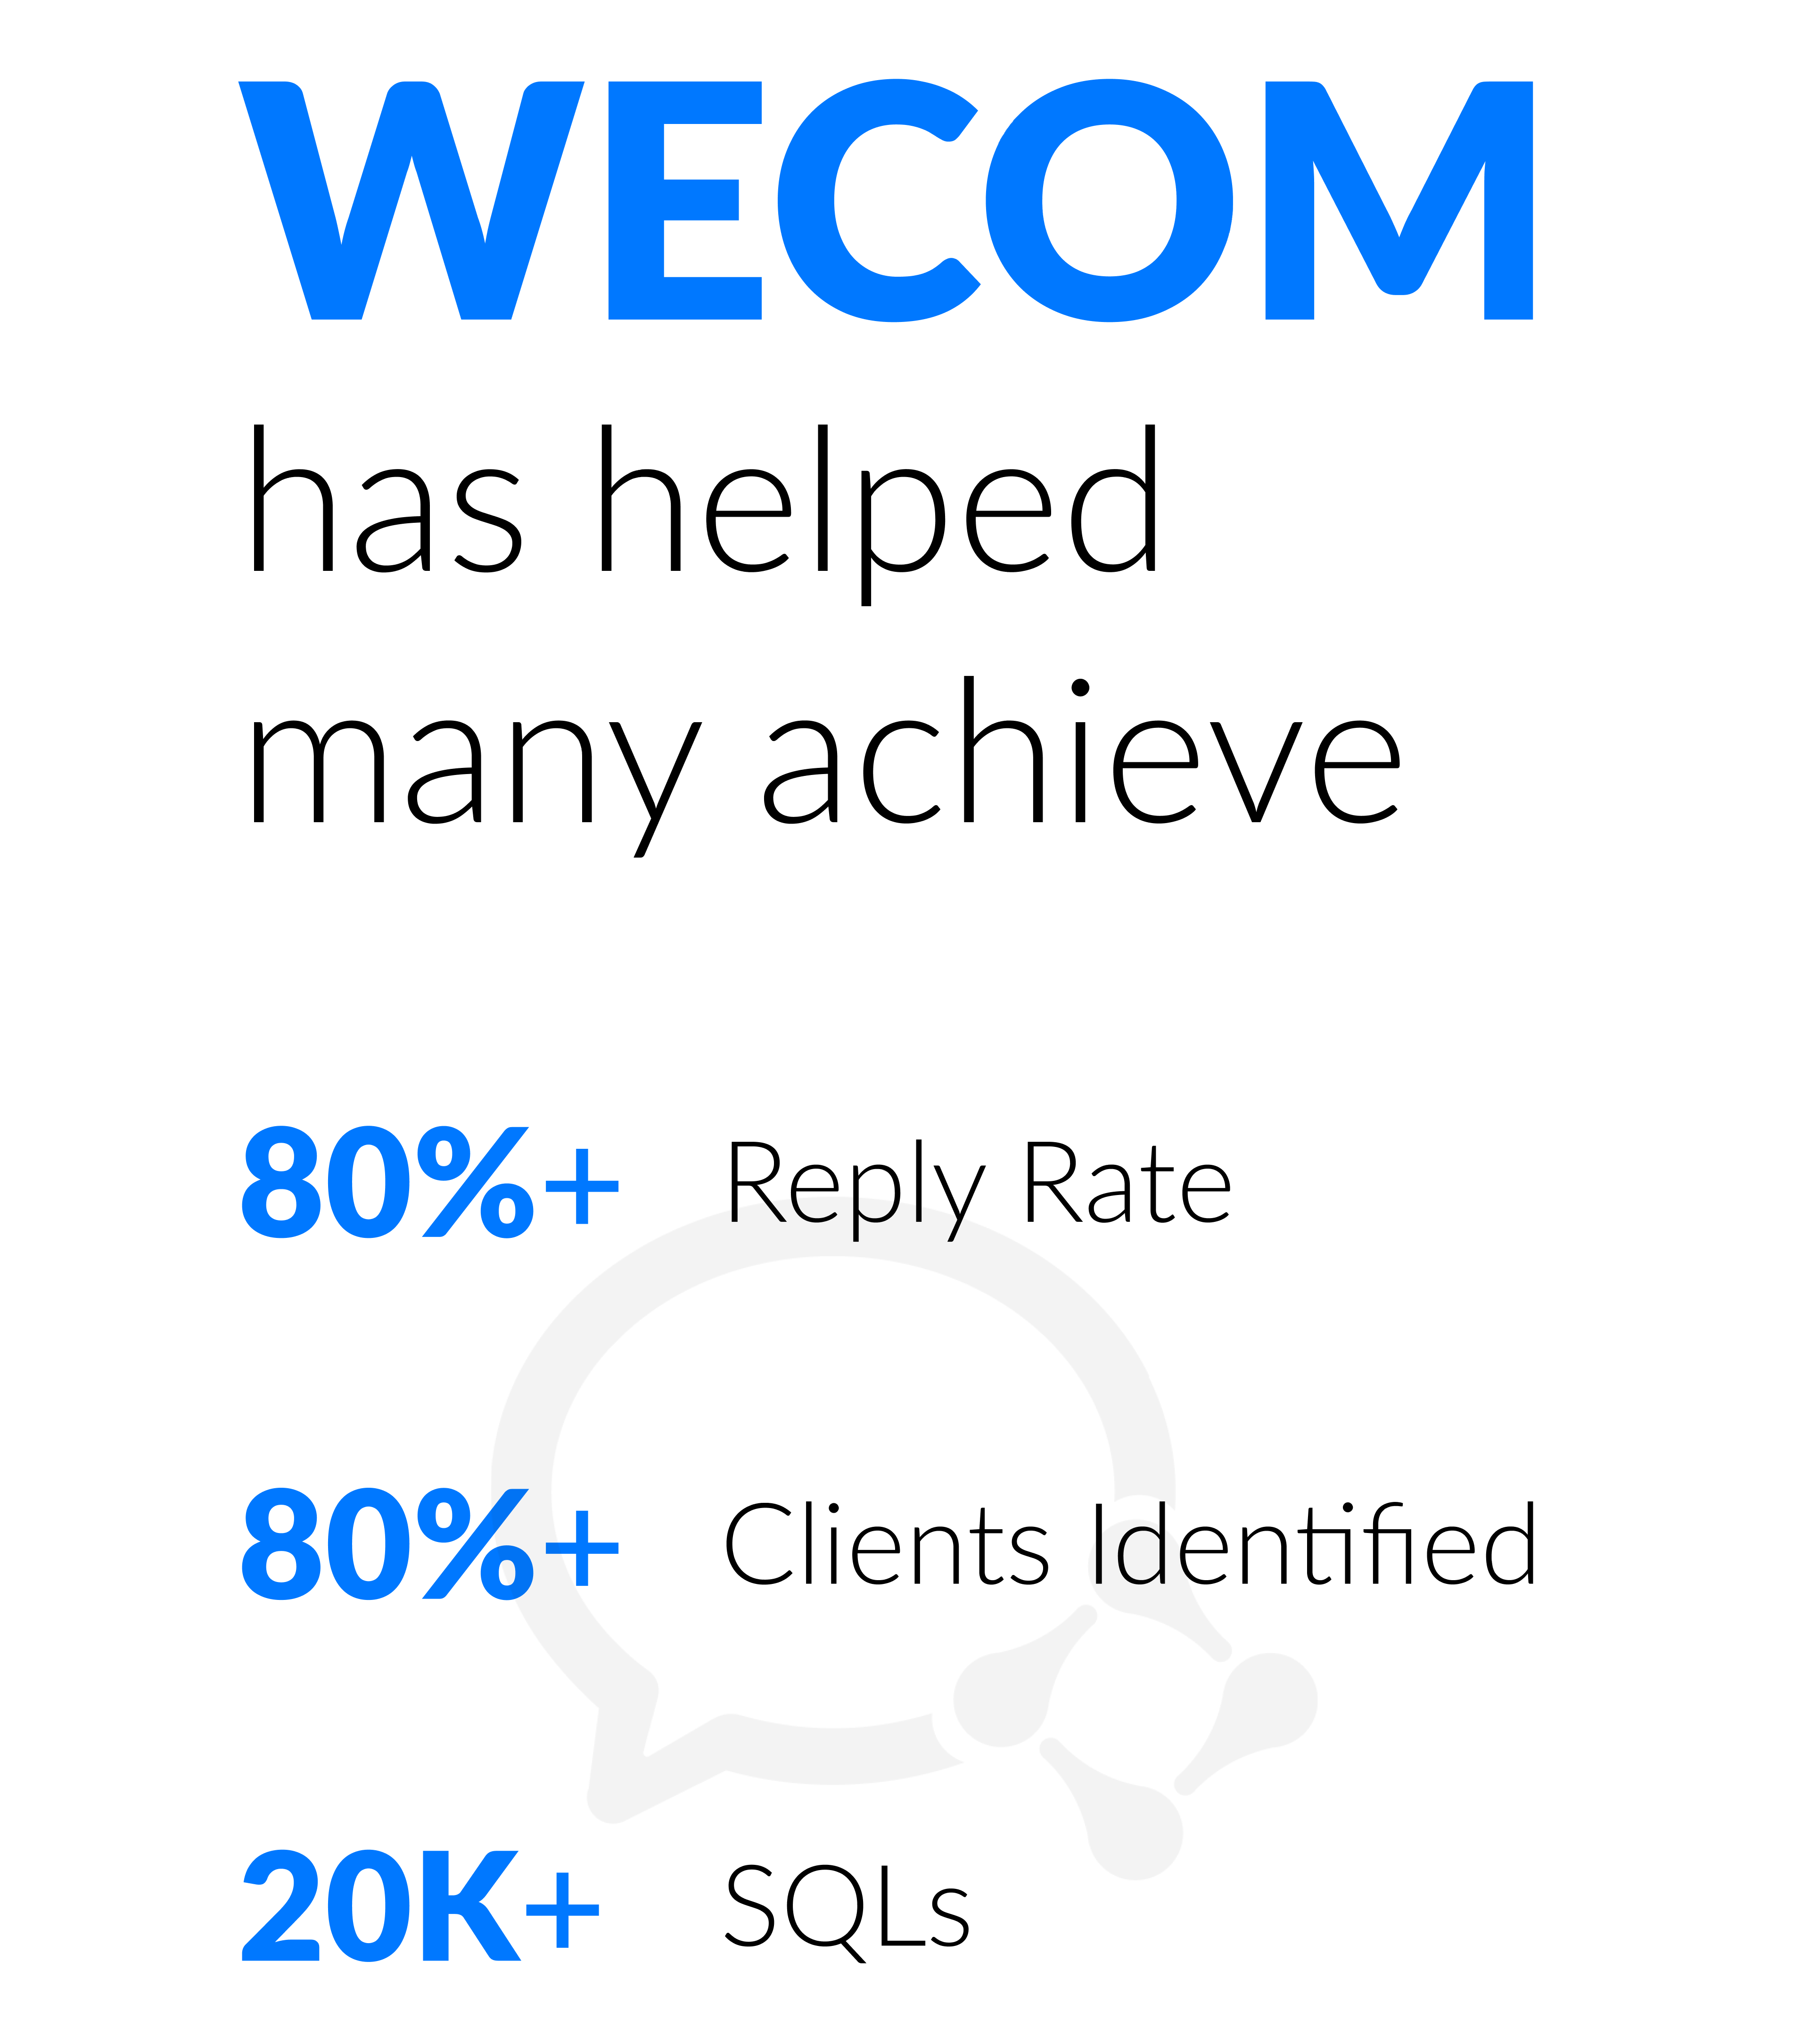 WeCom has helped many businesses achieve 80%+ reply rate, 80%+ client identification, and generate 20K+ sales-qualified leads